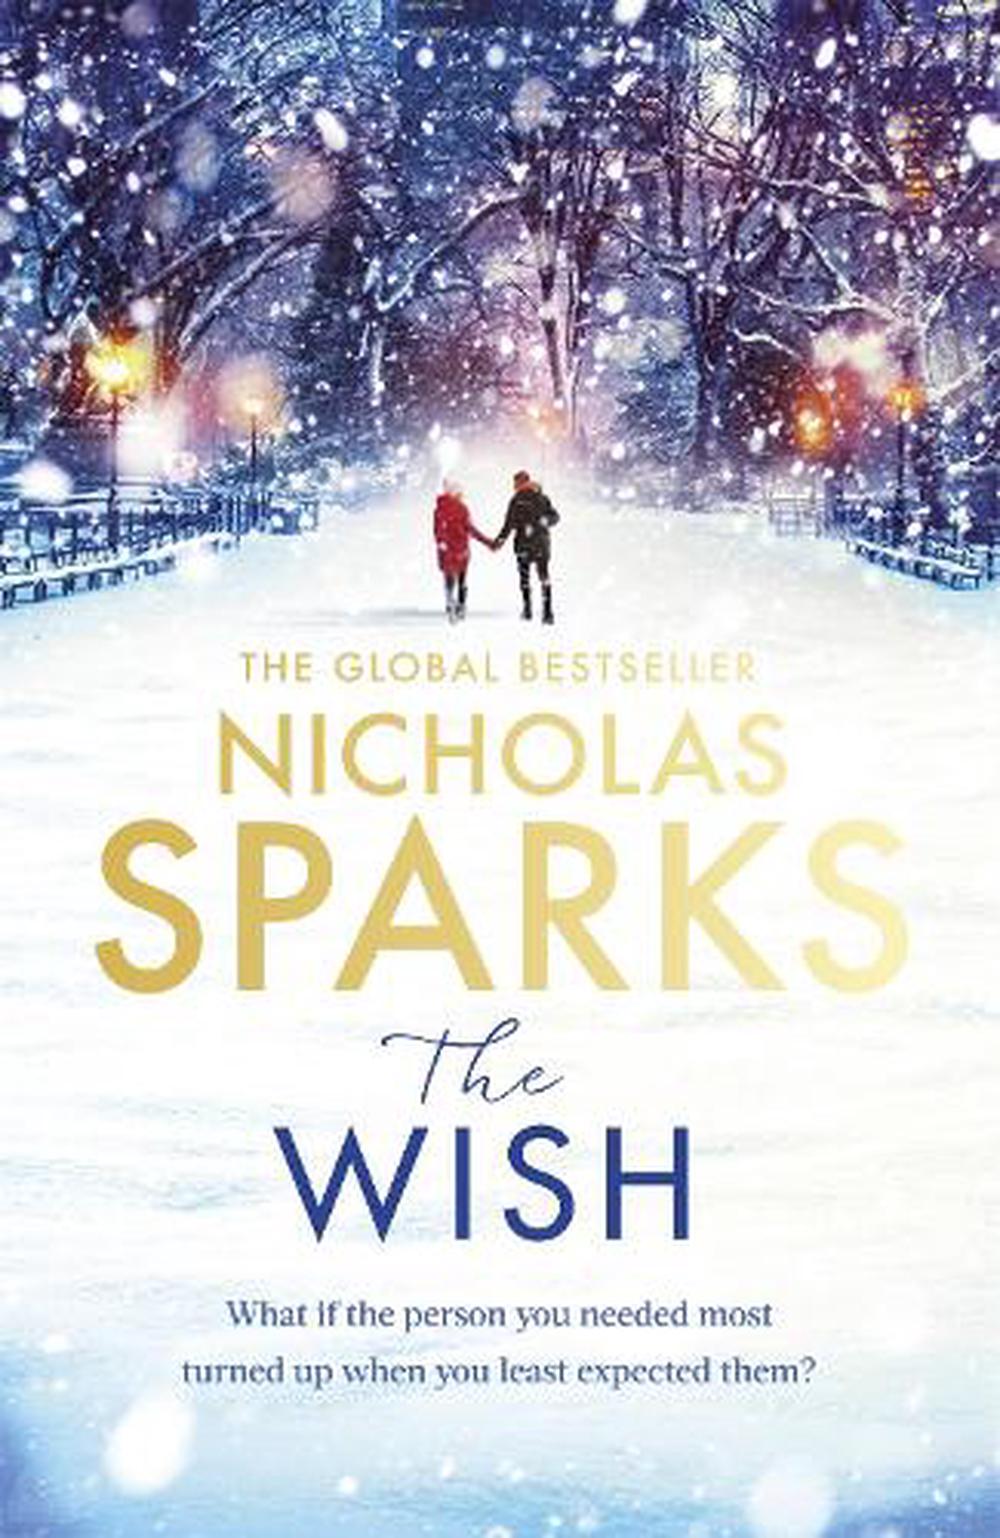 The Wish by Nicholas Sparks, Hardcover, 9780751567861 Buy online at